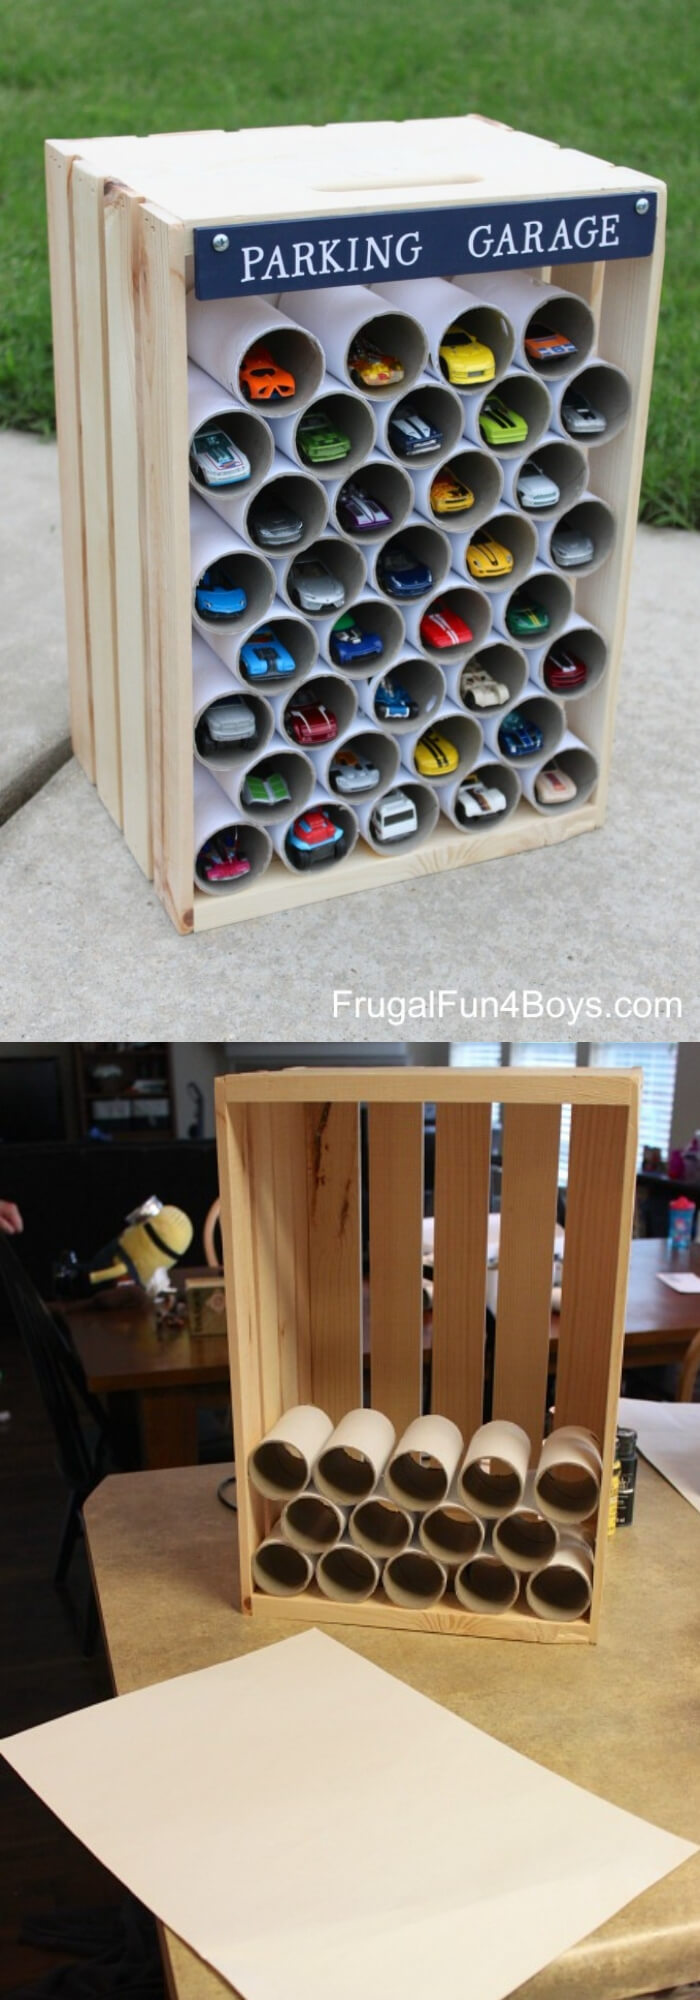 Wooden crate parking garage | Best DIY Wood Crate Projects & Ideas